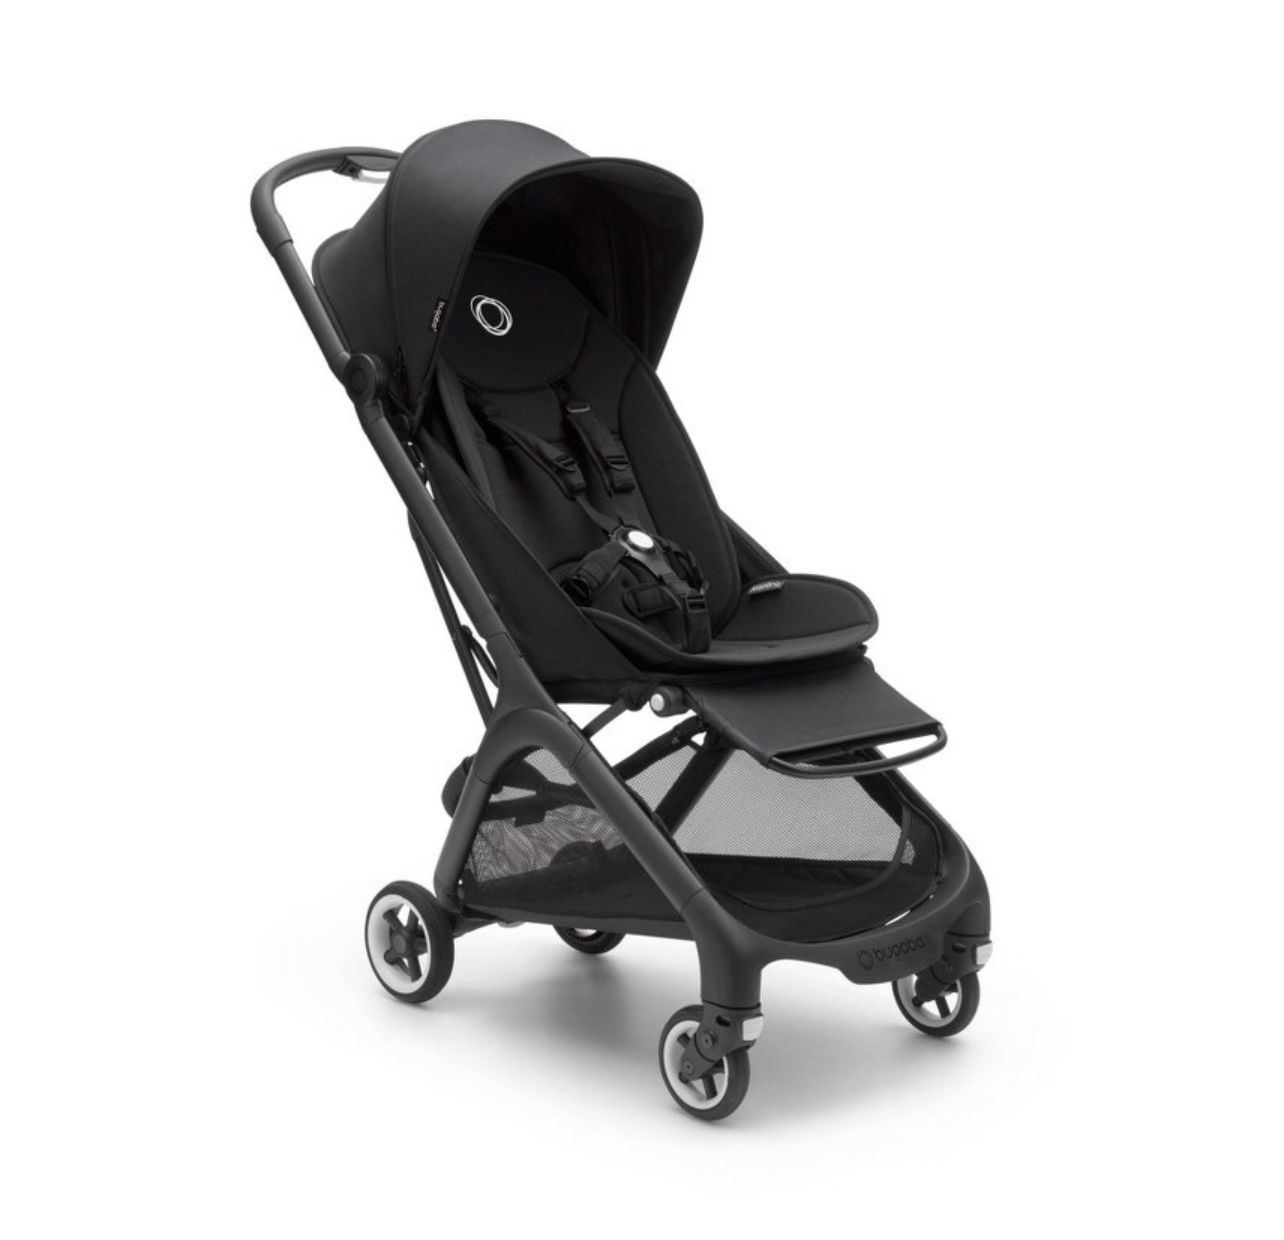 Bugaboo Butterfly 1 Second Fold Ultra Compact Stroller - Midnight Black